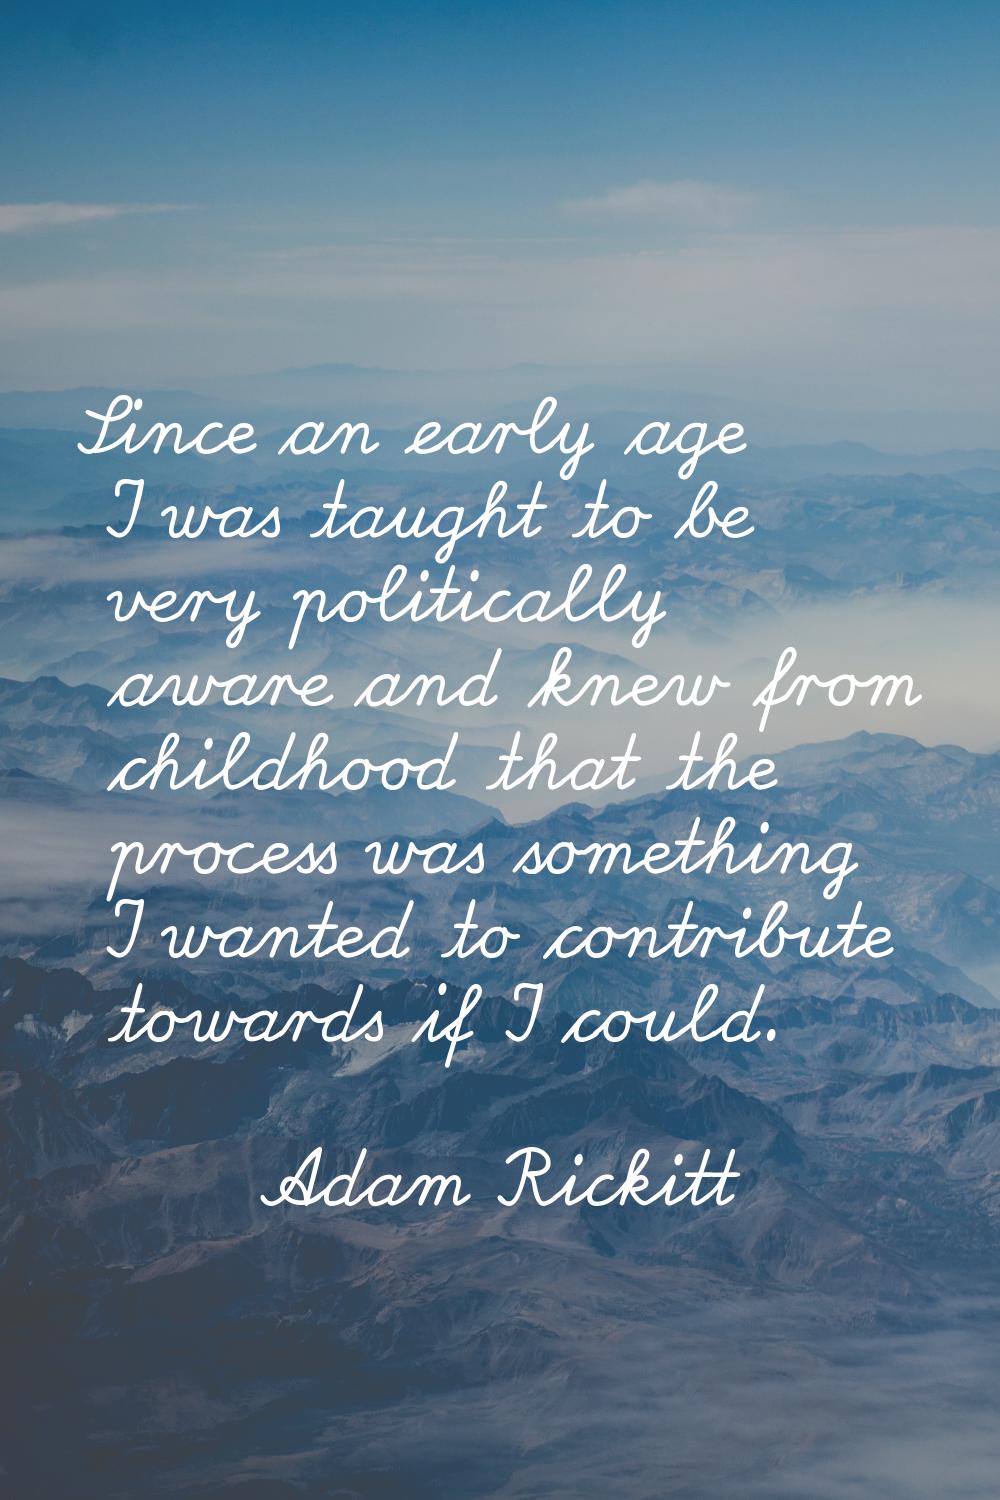 Since an early age I was taught to be very politically aware and knew from childhood that the proce